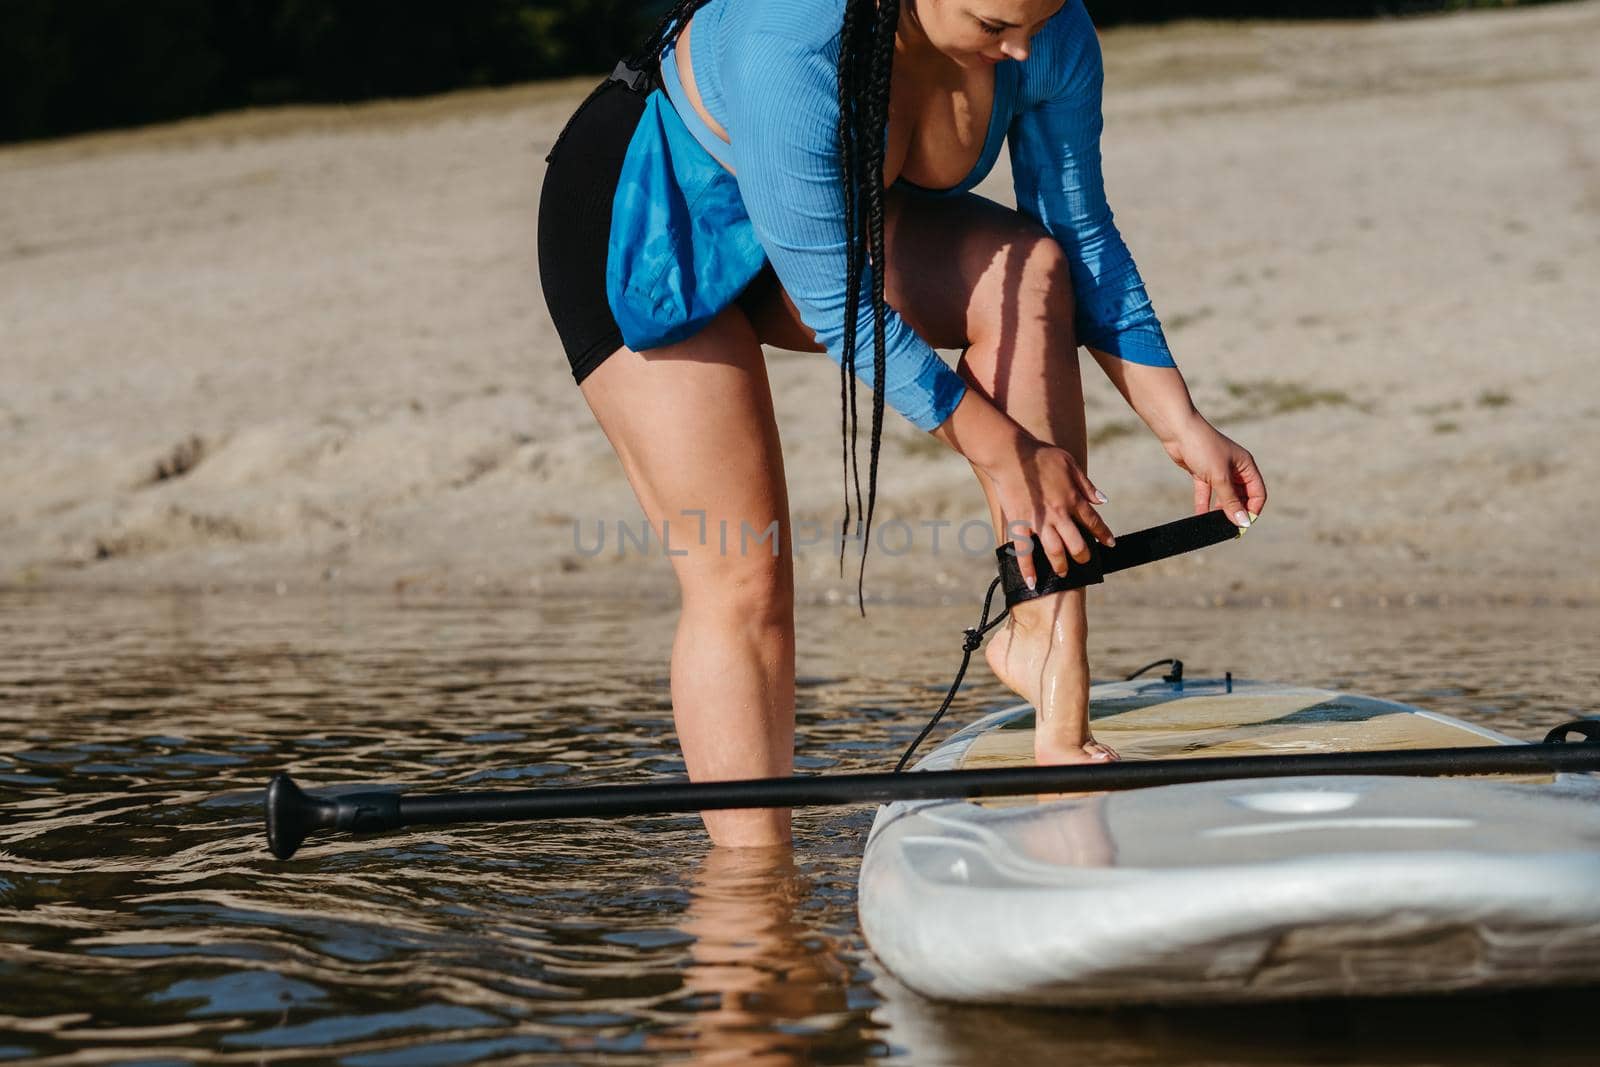 Woman Attaching Insurance Cable of Sup to Her Leg, Preparing to Swim on a Board by Romvy